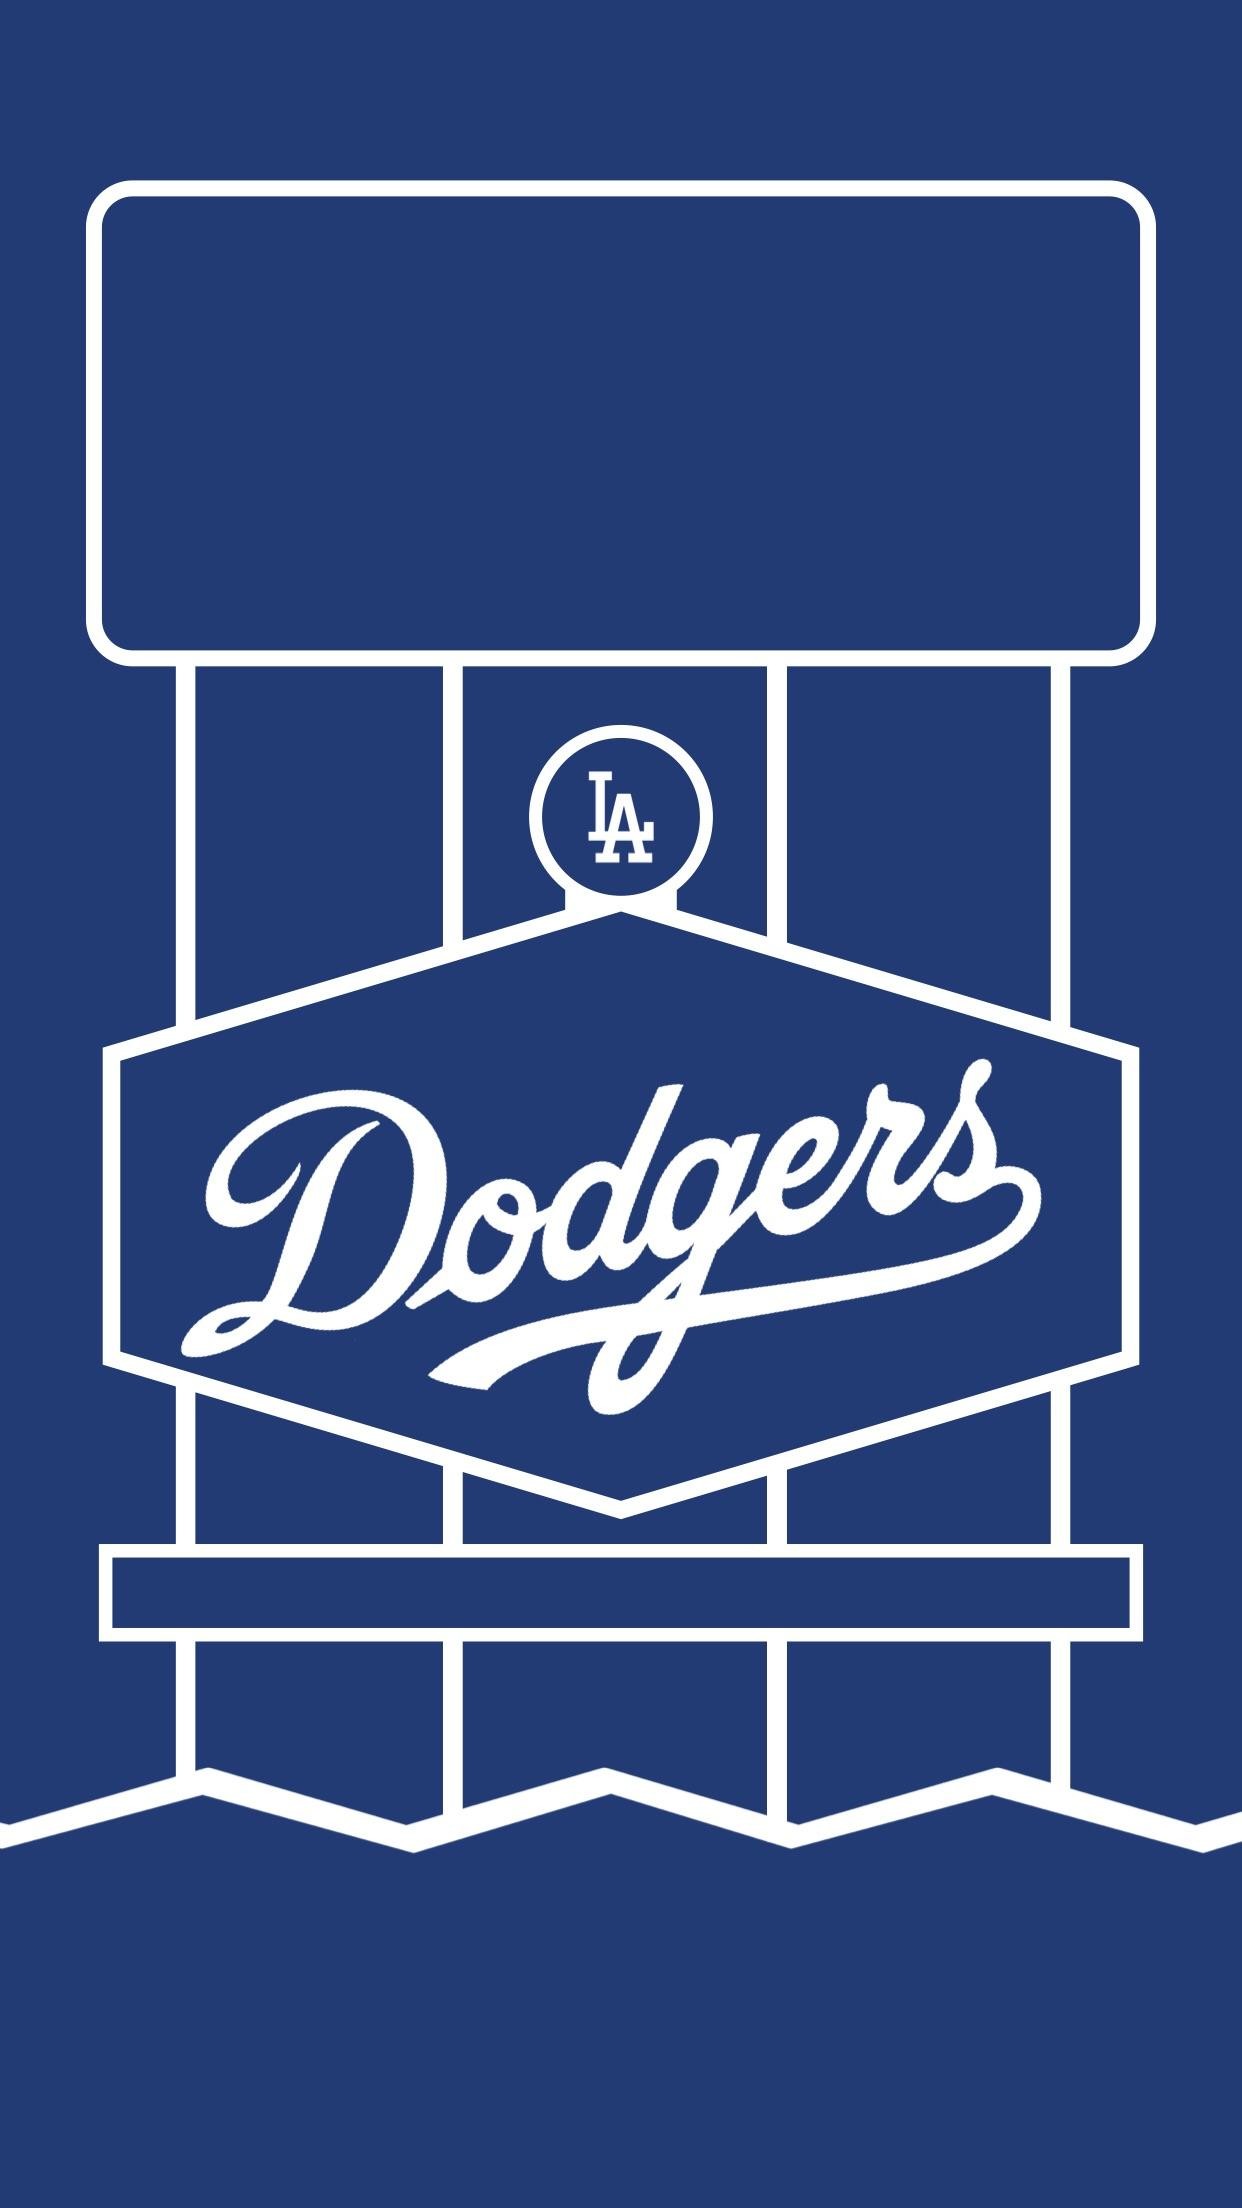 1242x2208 minimal dodger iPhone wallpaper I made! The time and date fit perfectly in  the lights rectangle ...